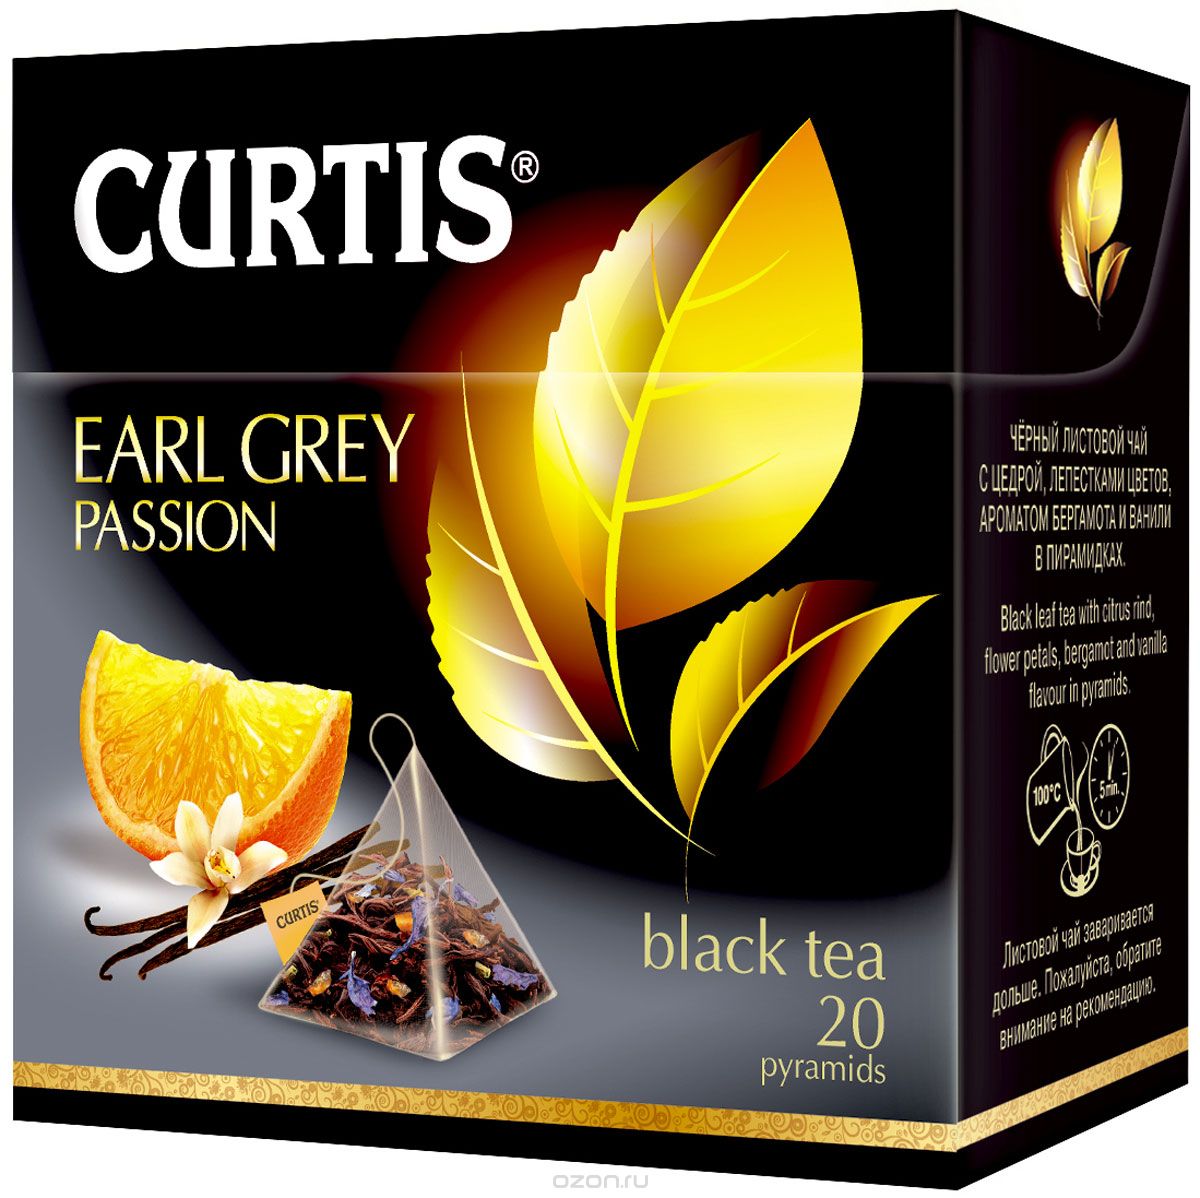 Curtis Earl Grey Passion    , 20 